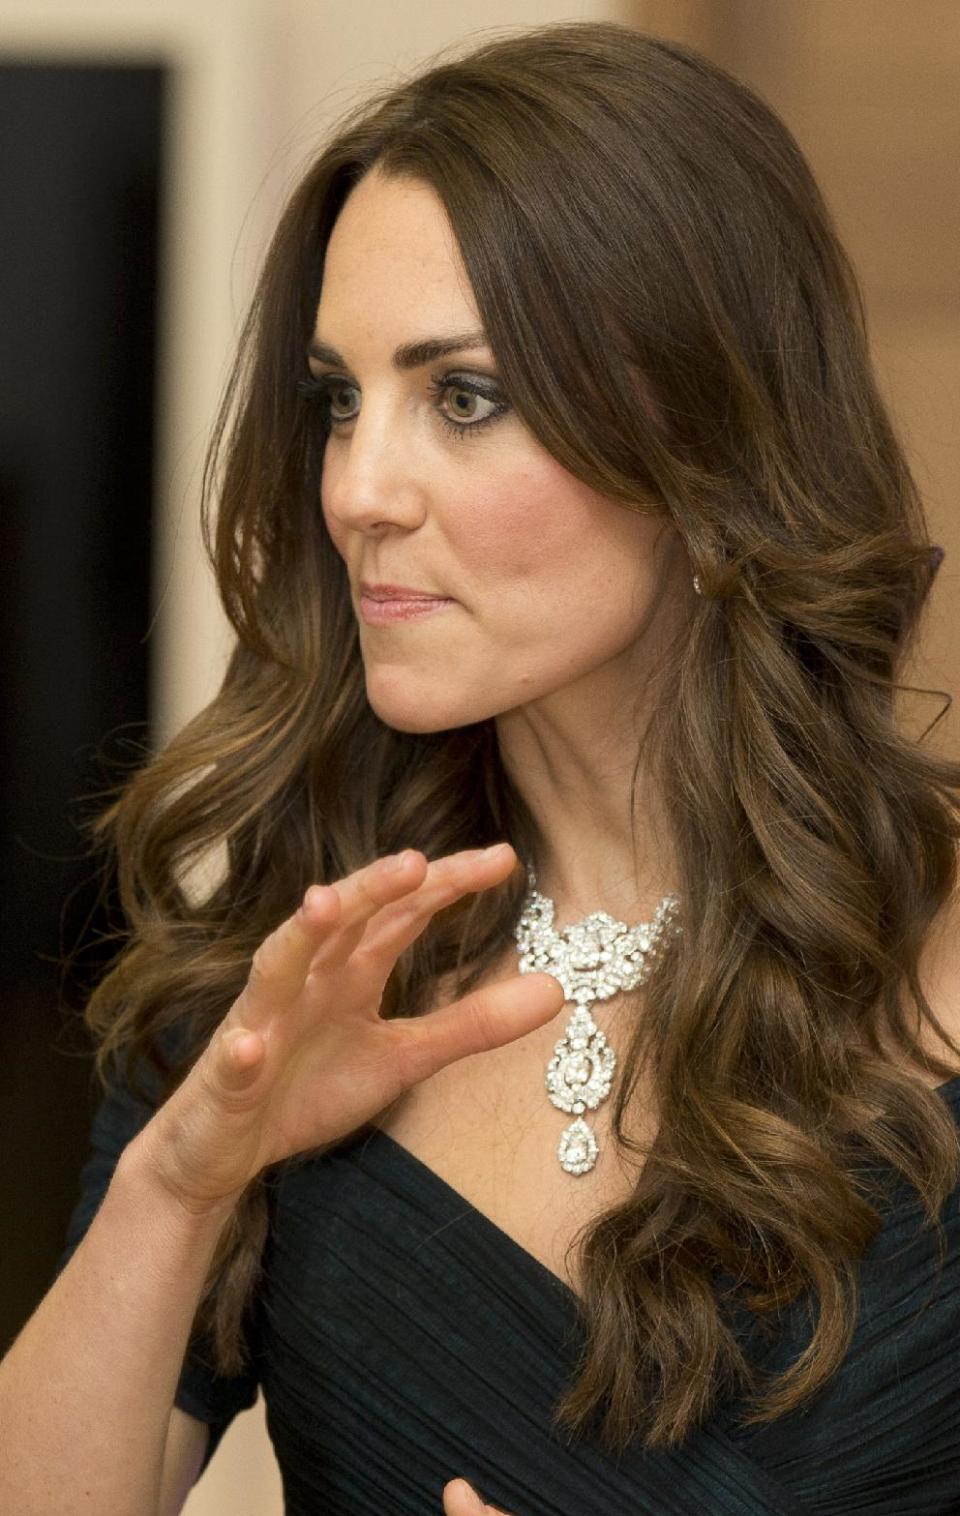 Kate Duchess of Cambridge talks to guests at a fund raising gala at theNational Portrait Gallery in London, Tuesday, Feb. 11, 2014. . The Duchess is wearing a dress by British designer Jenny Packham and a necklace on loan from Queen Elizabeth II that was given to the Queen as a gift for her wedding in 1947. (AP Photo/Alastair Grant, Pool)